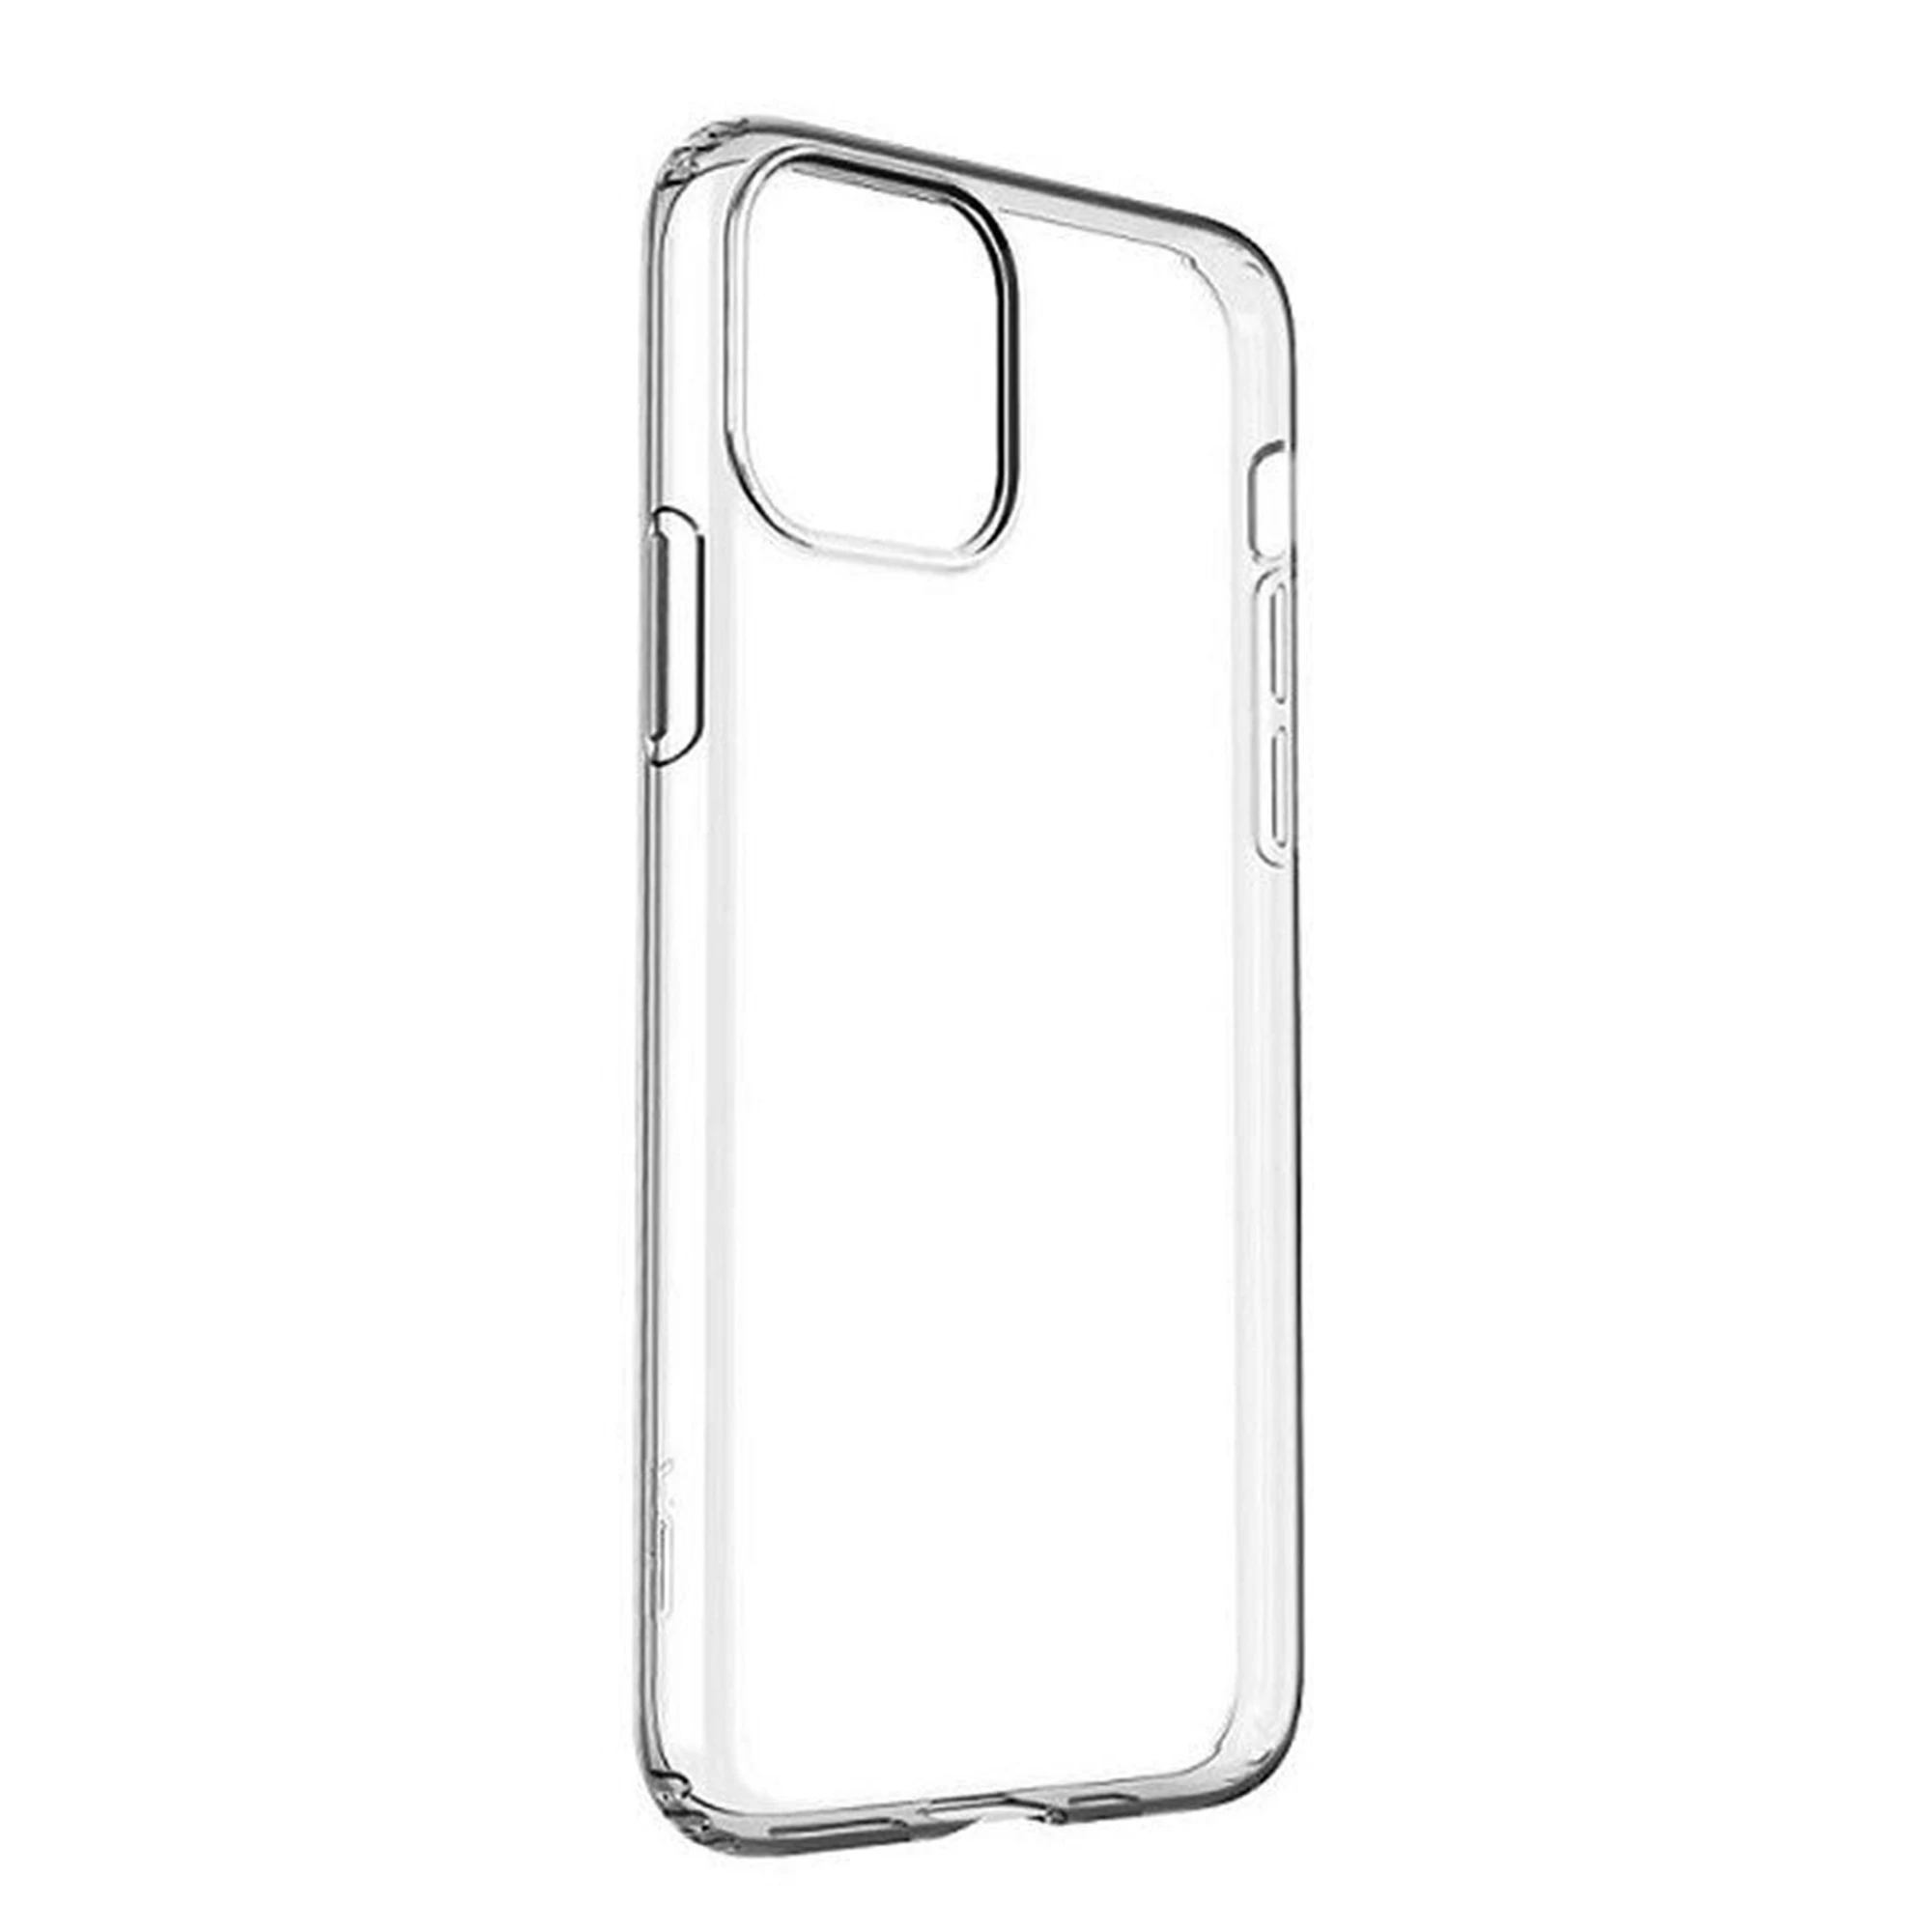 Rock Pure Series Protection for iPhone 12 | 12 Pro Case - Transparent